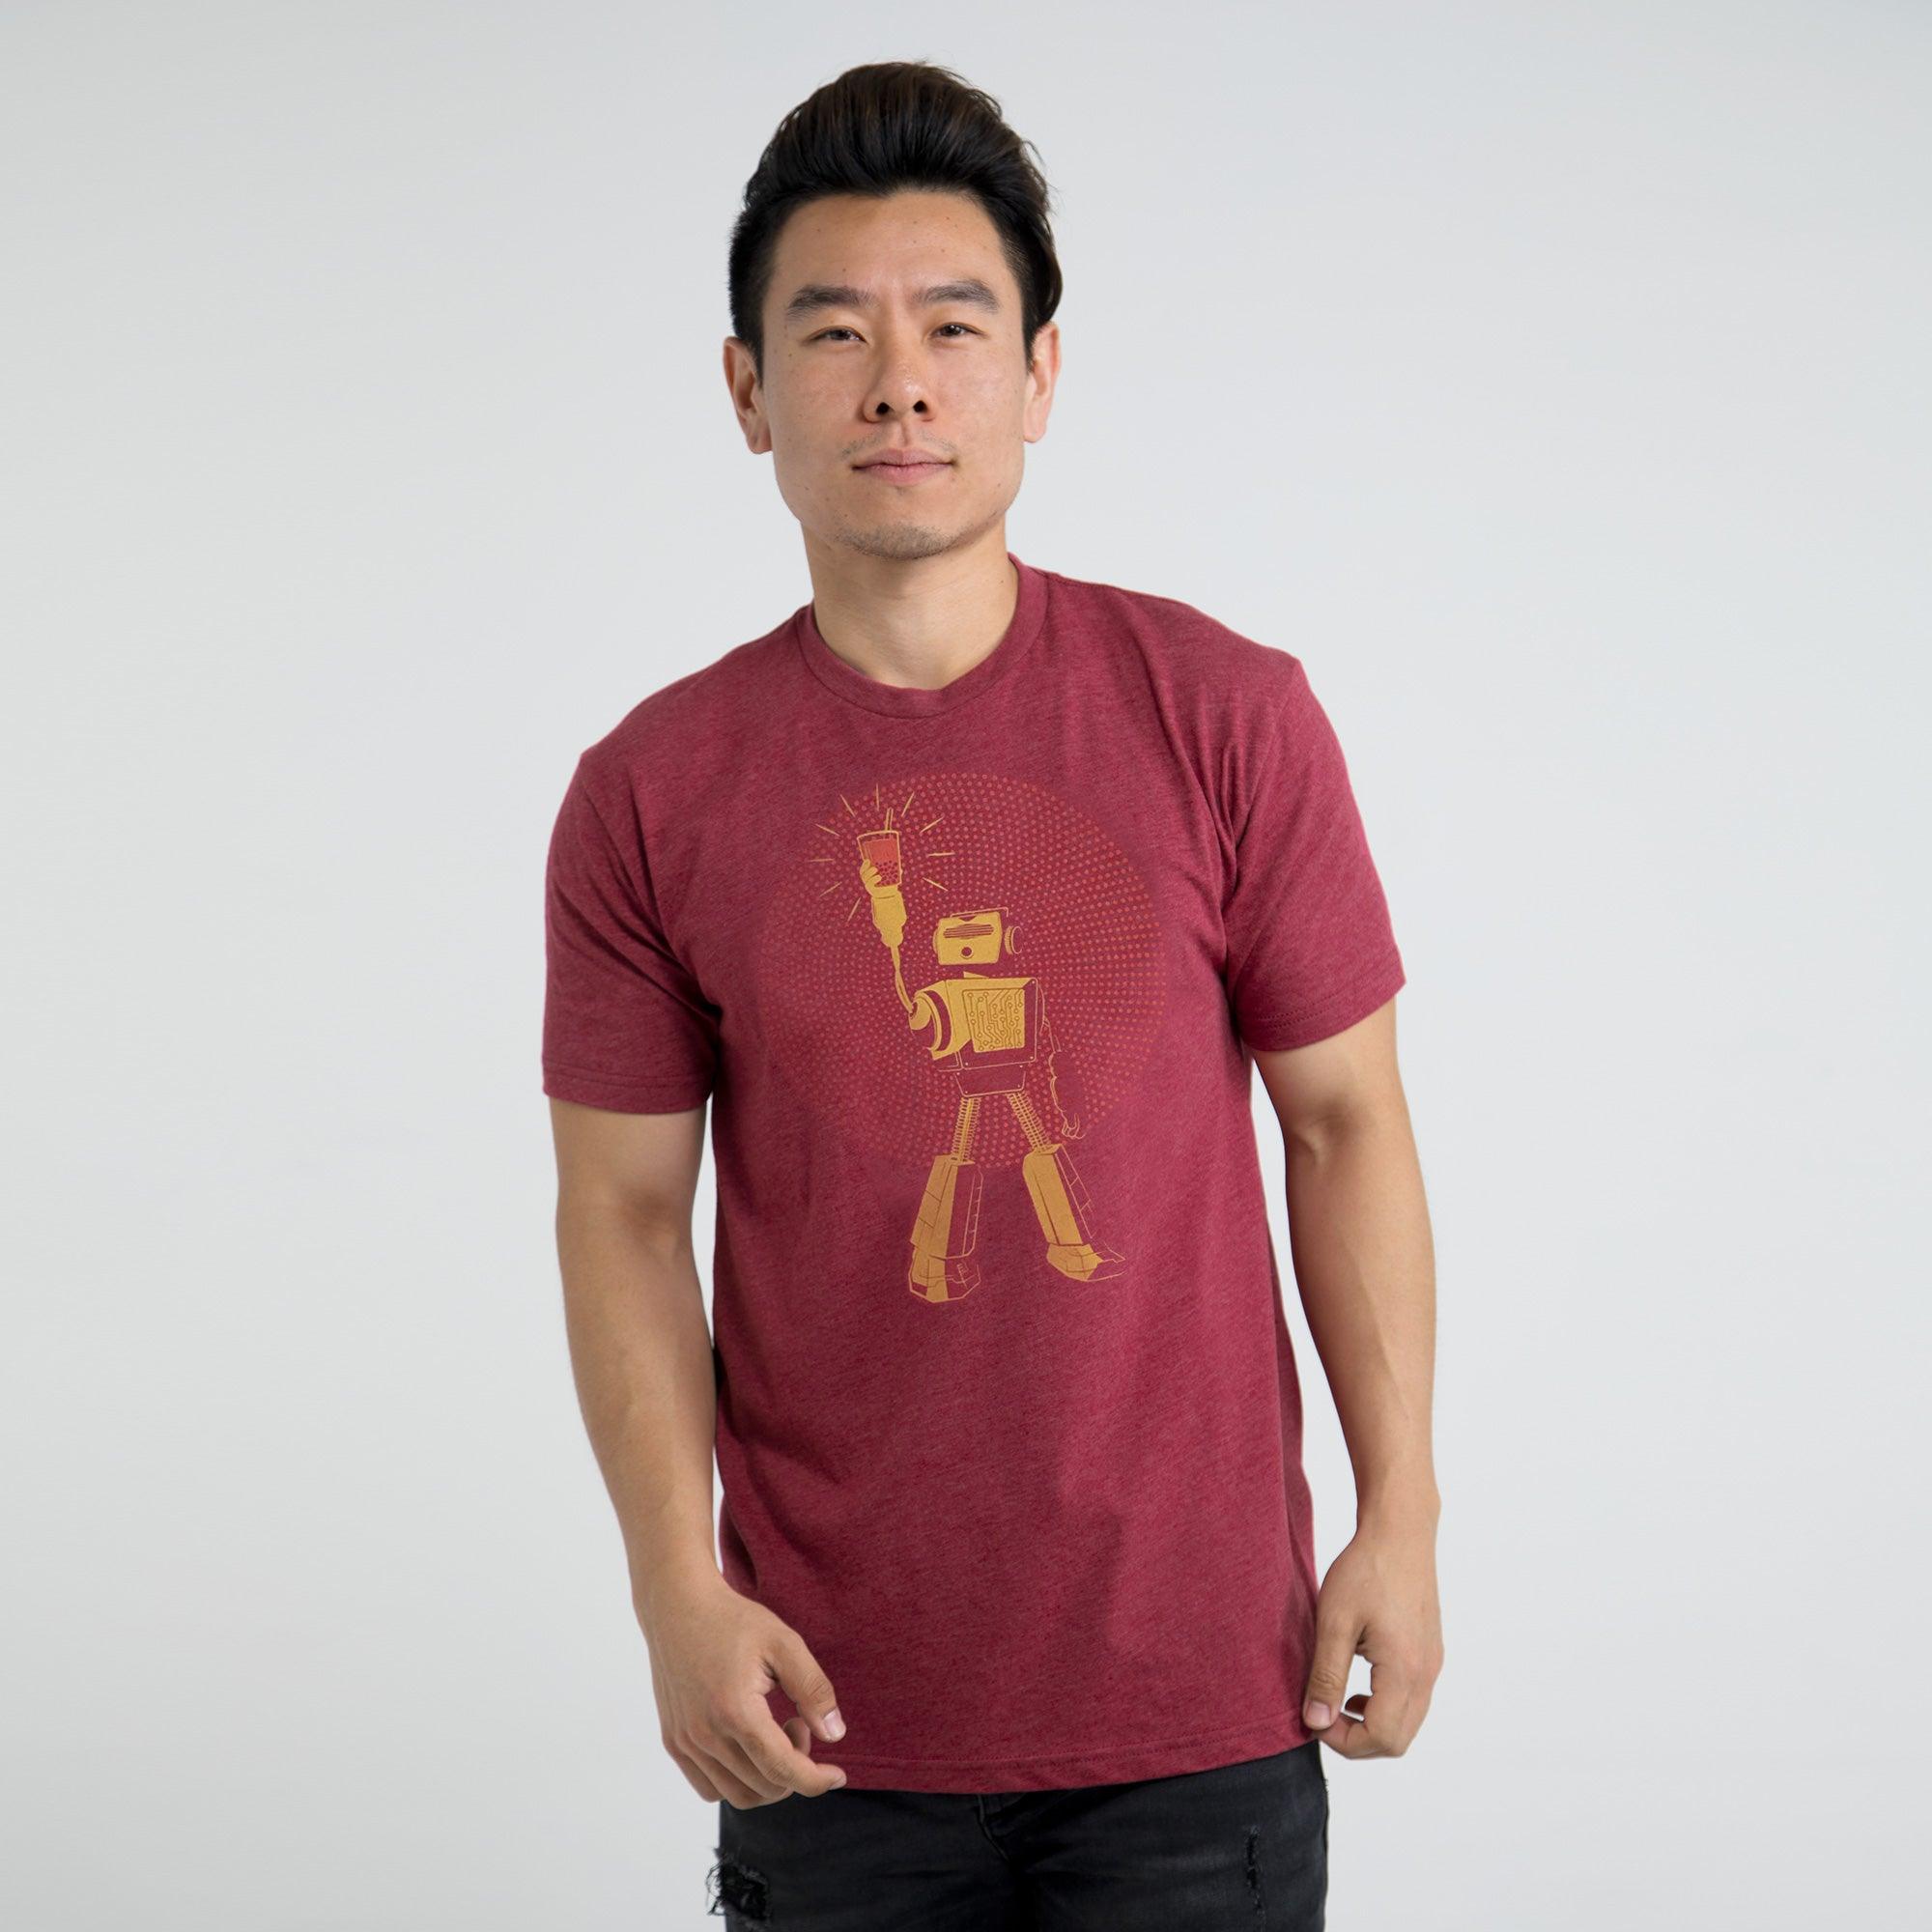 Boba T-shirt featuring Boba Bot by STORY SPARK